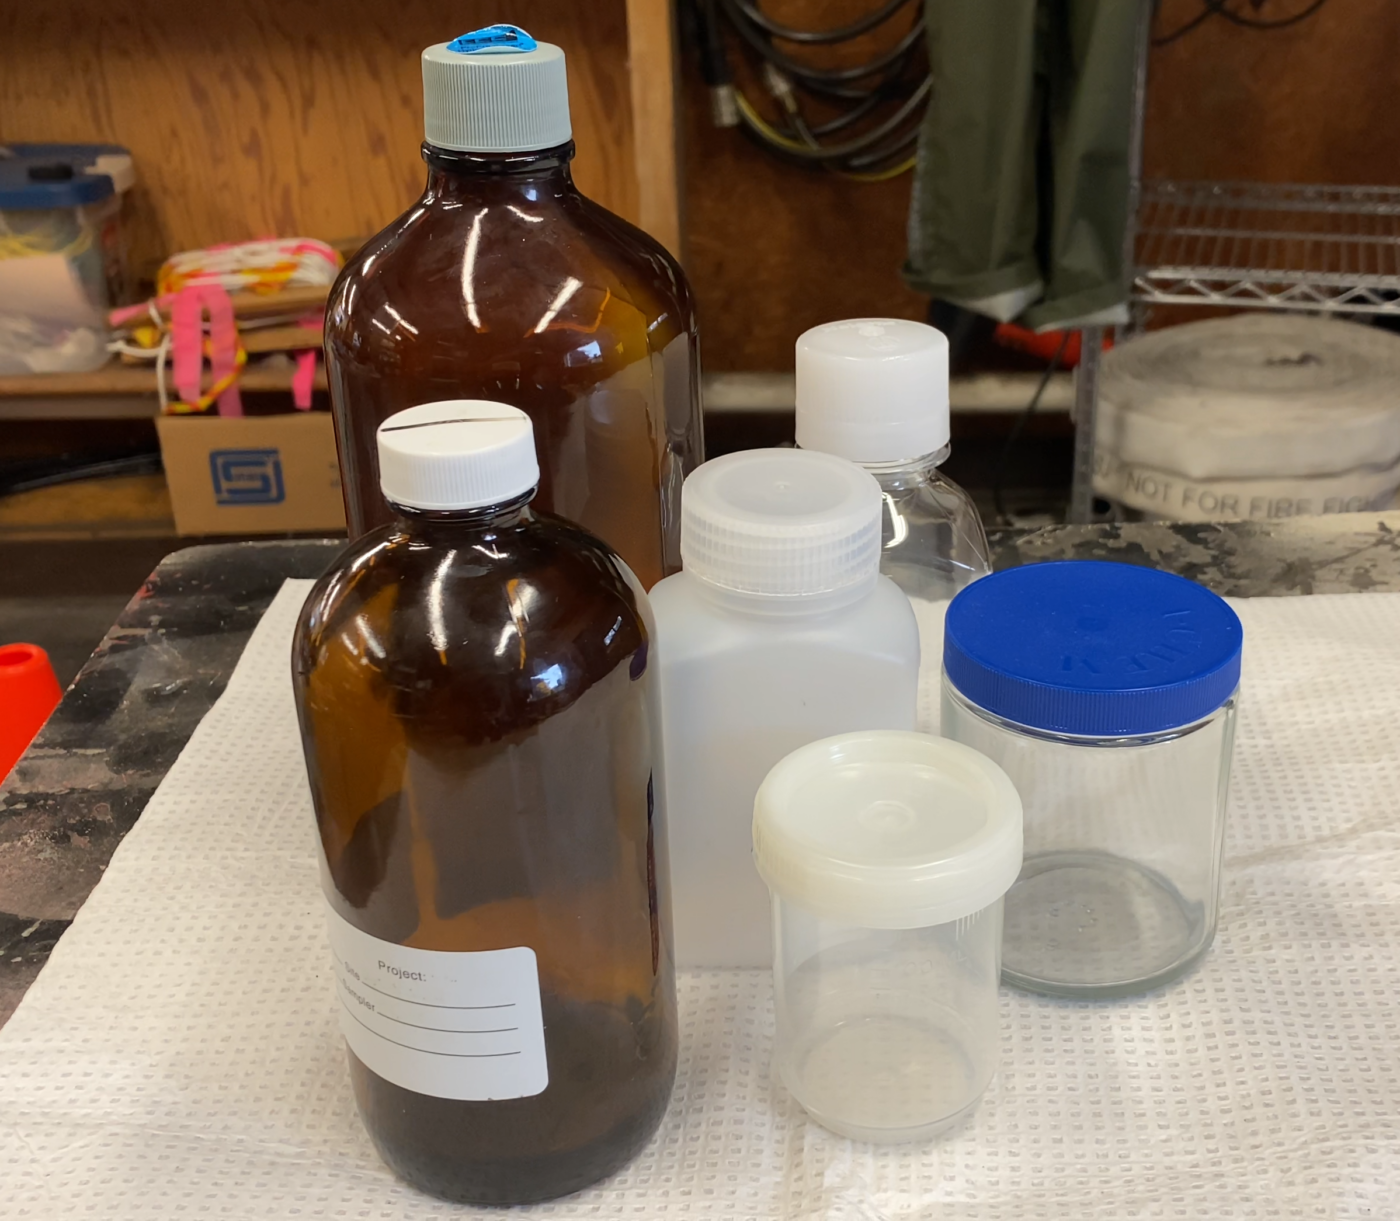 6 generic sampling bottles of various shapes and sizes